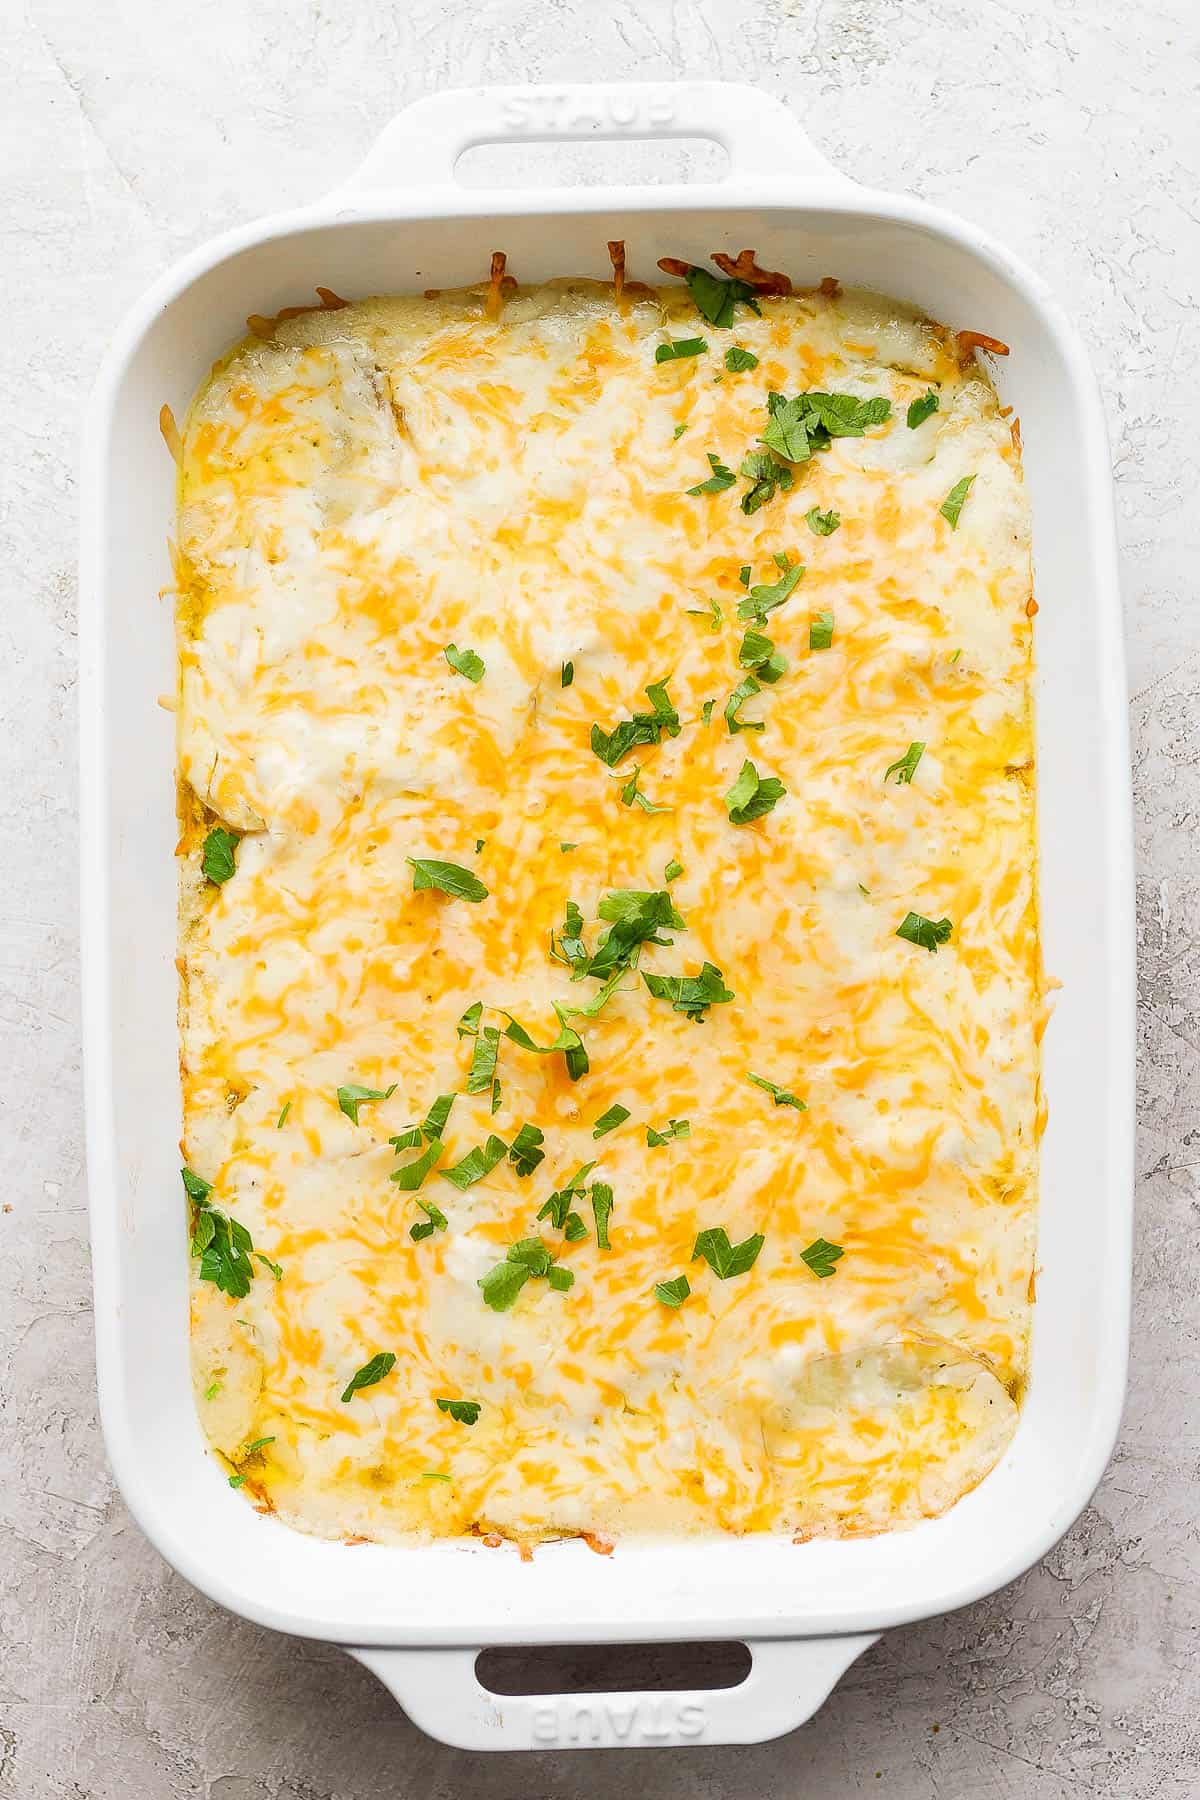 Cheesy scalloped potatoes in the baking dish after being cooked.